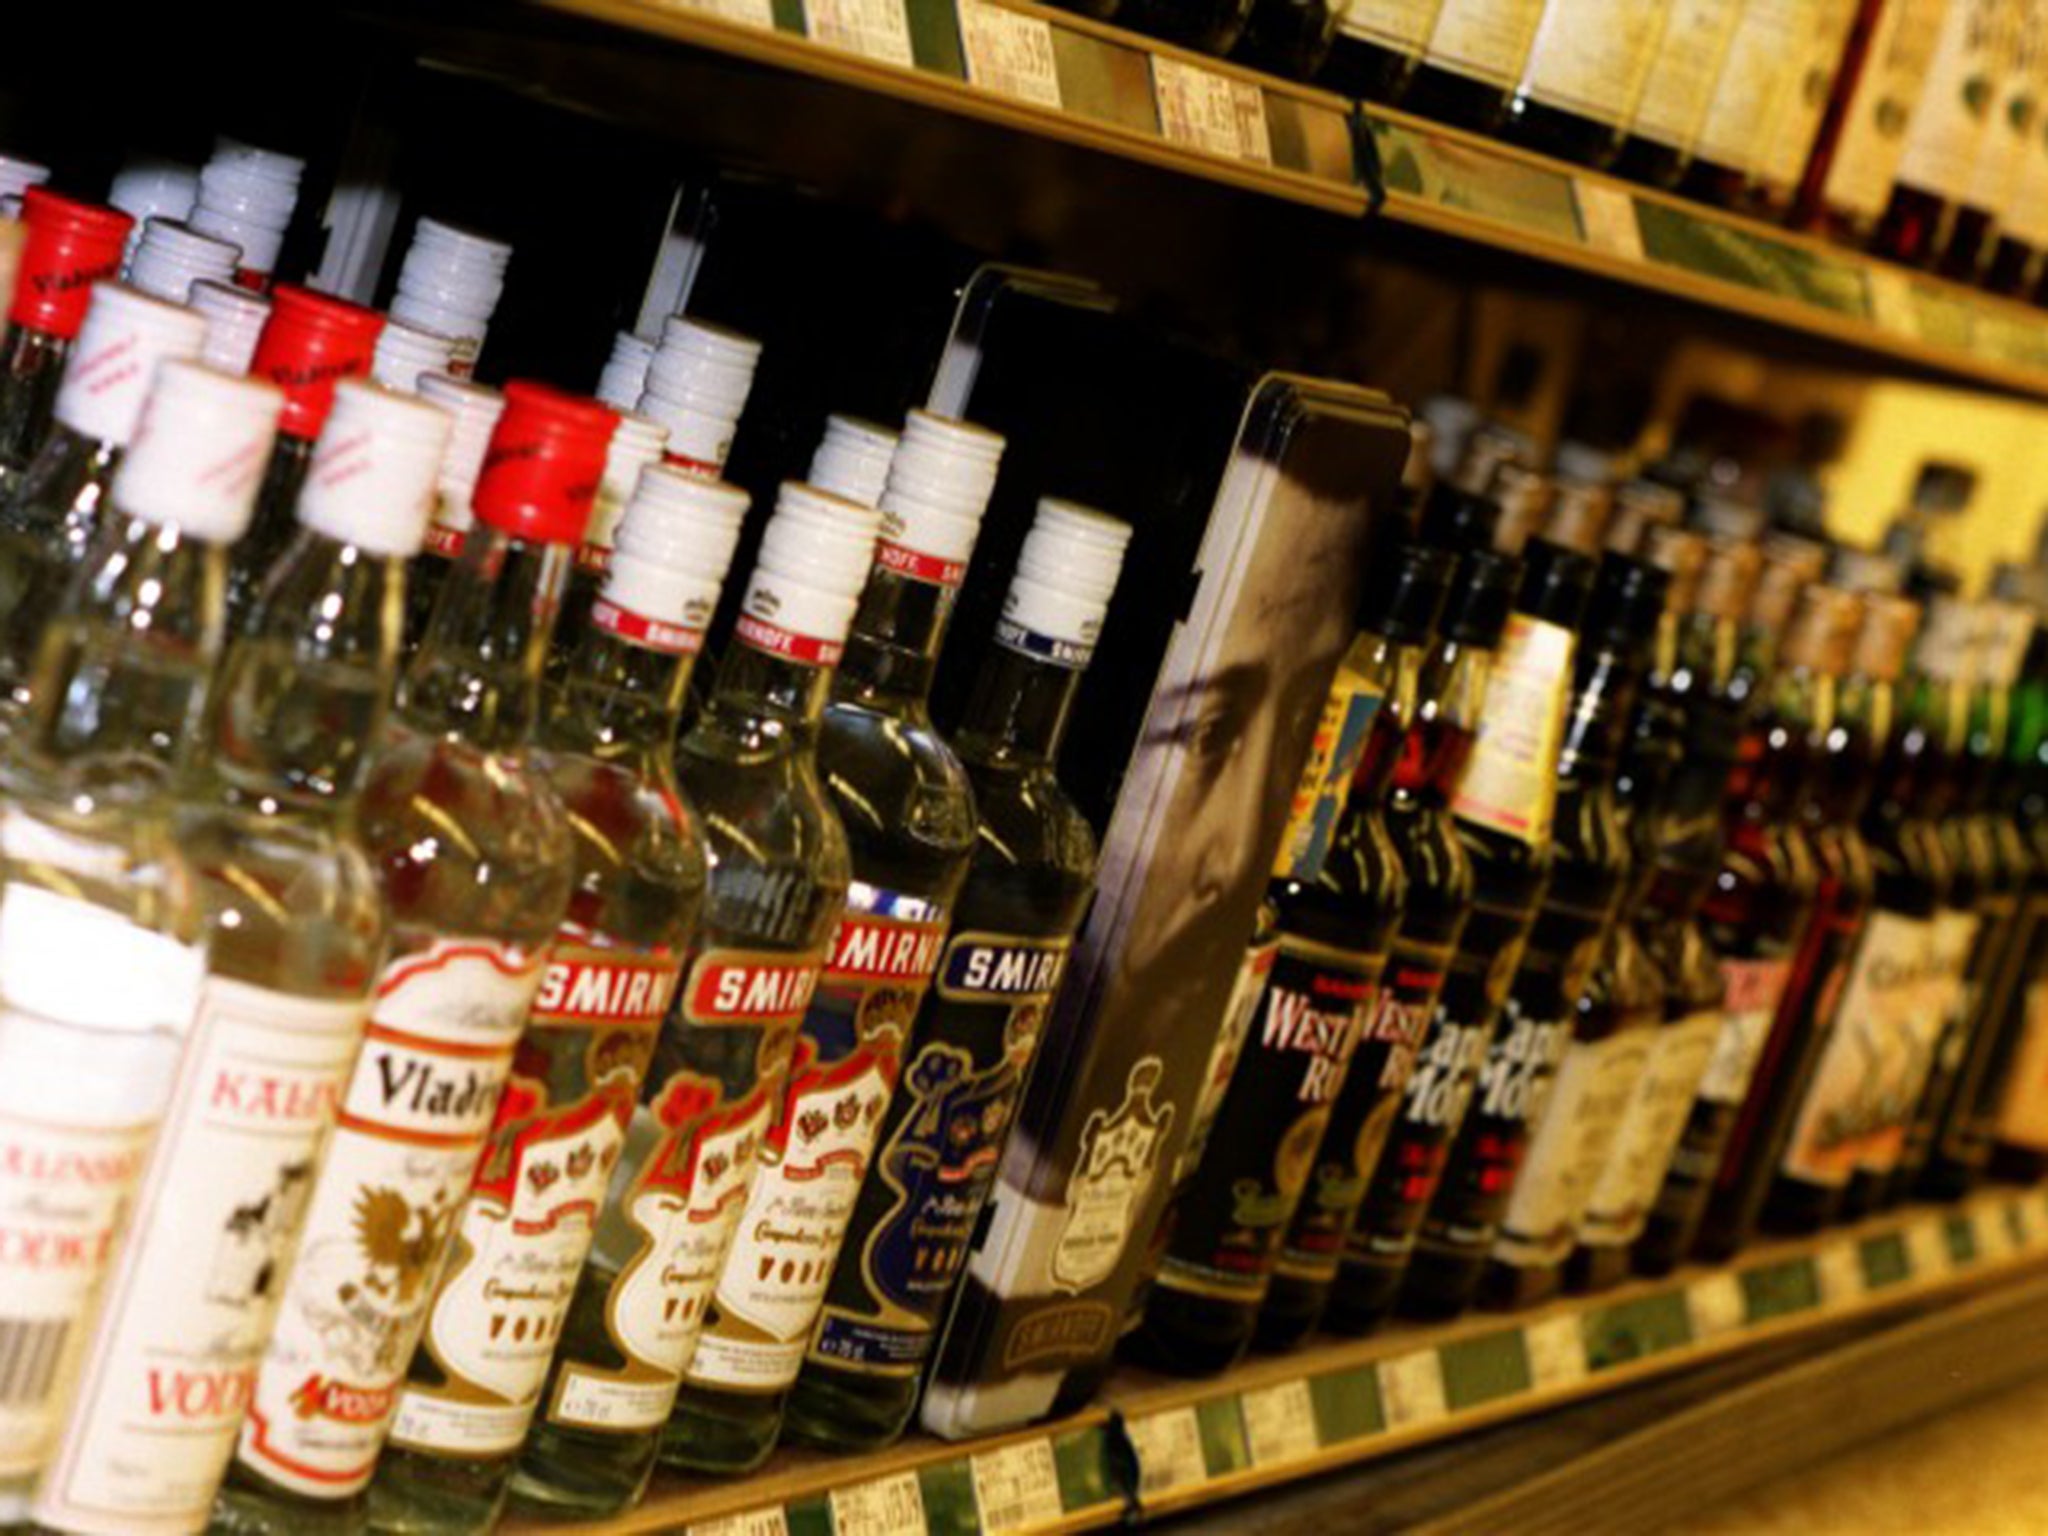 Tax now accounts for ‘nearly 80%’ of the price of a bottle of whisky